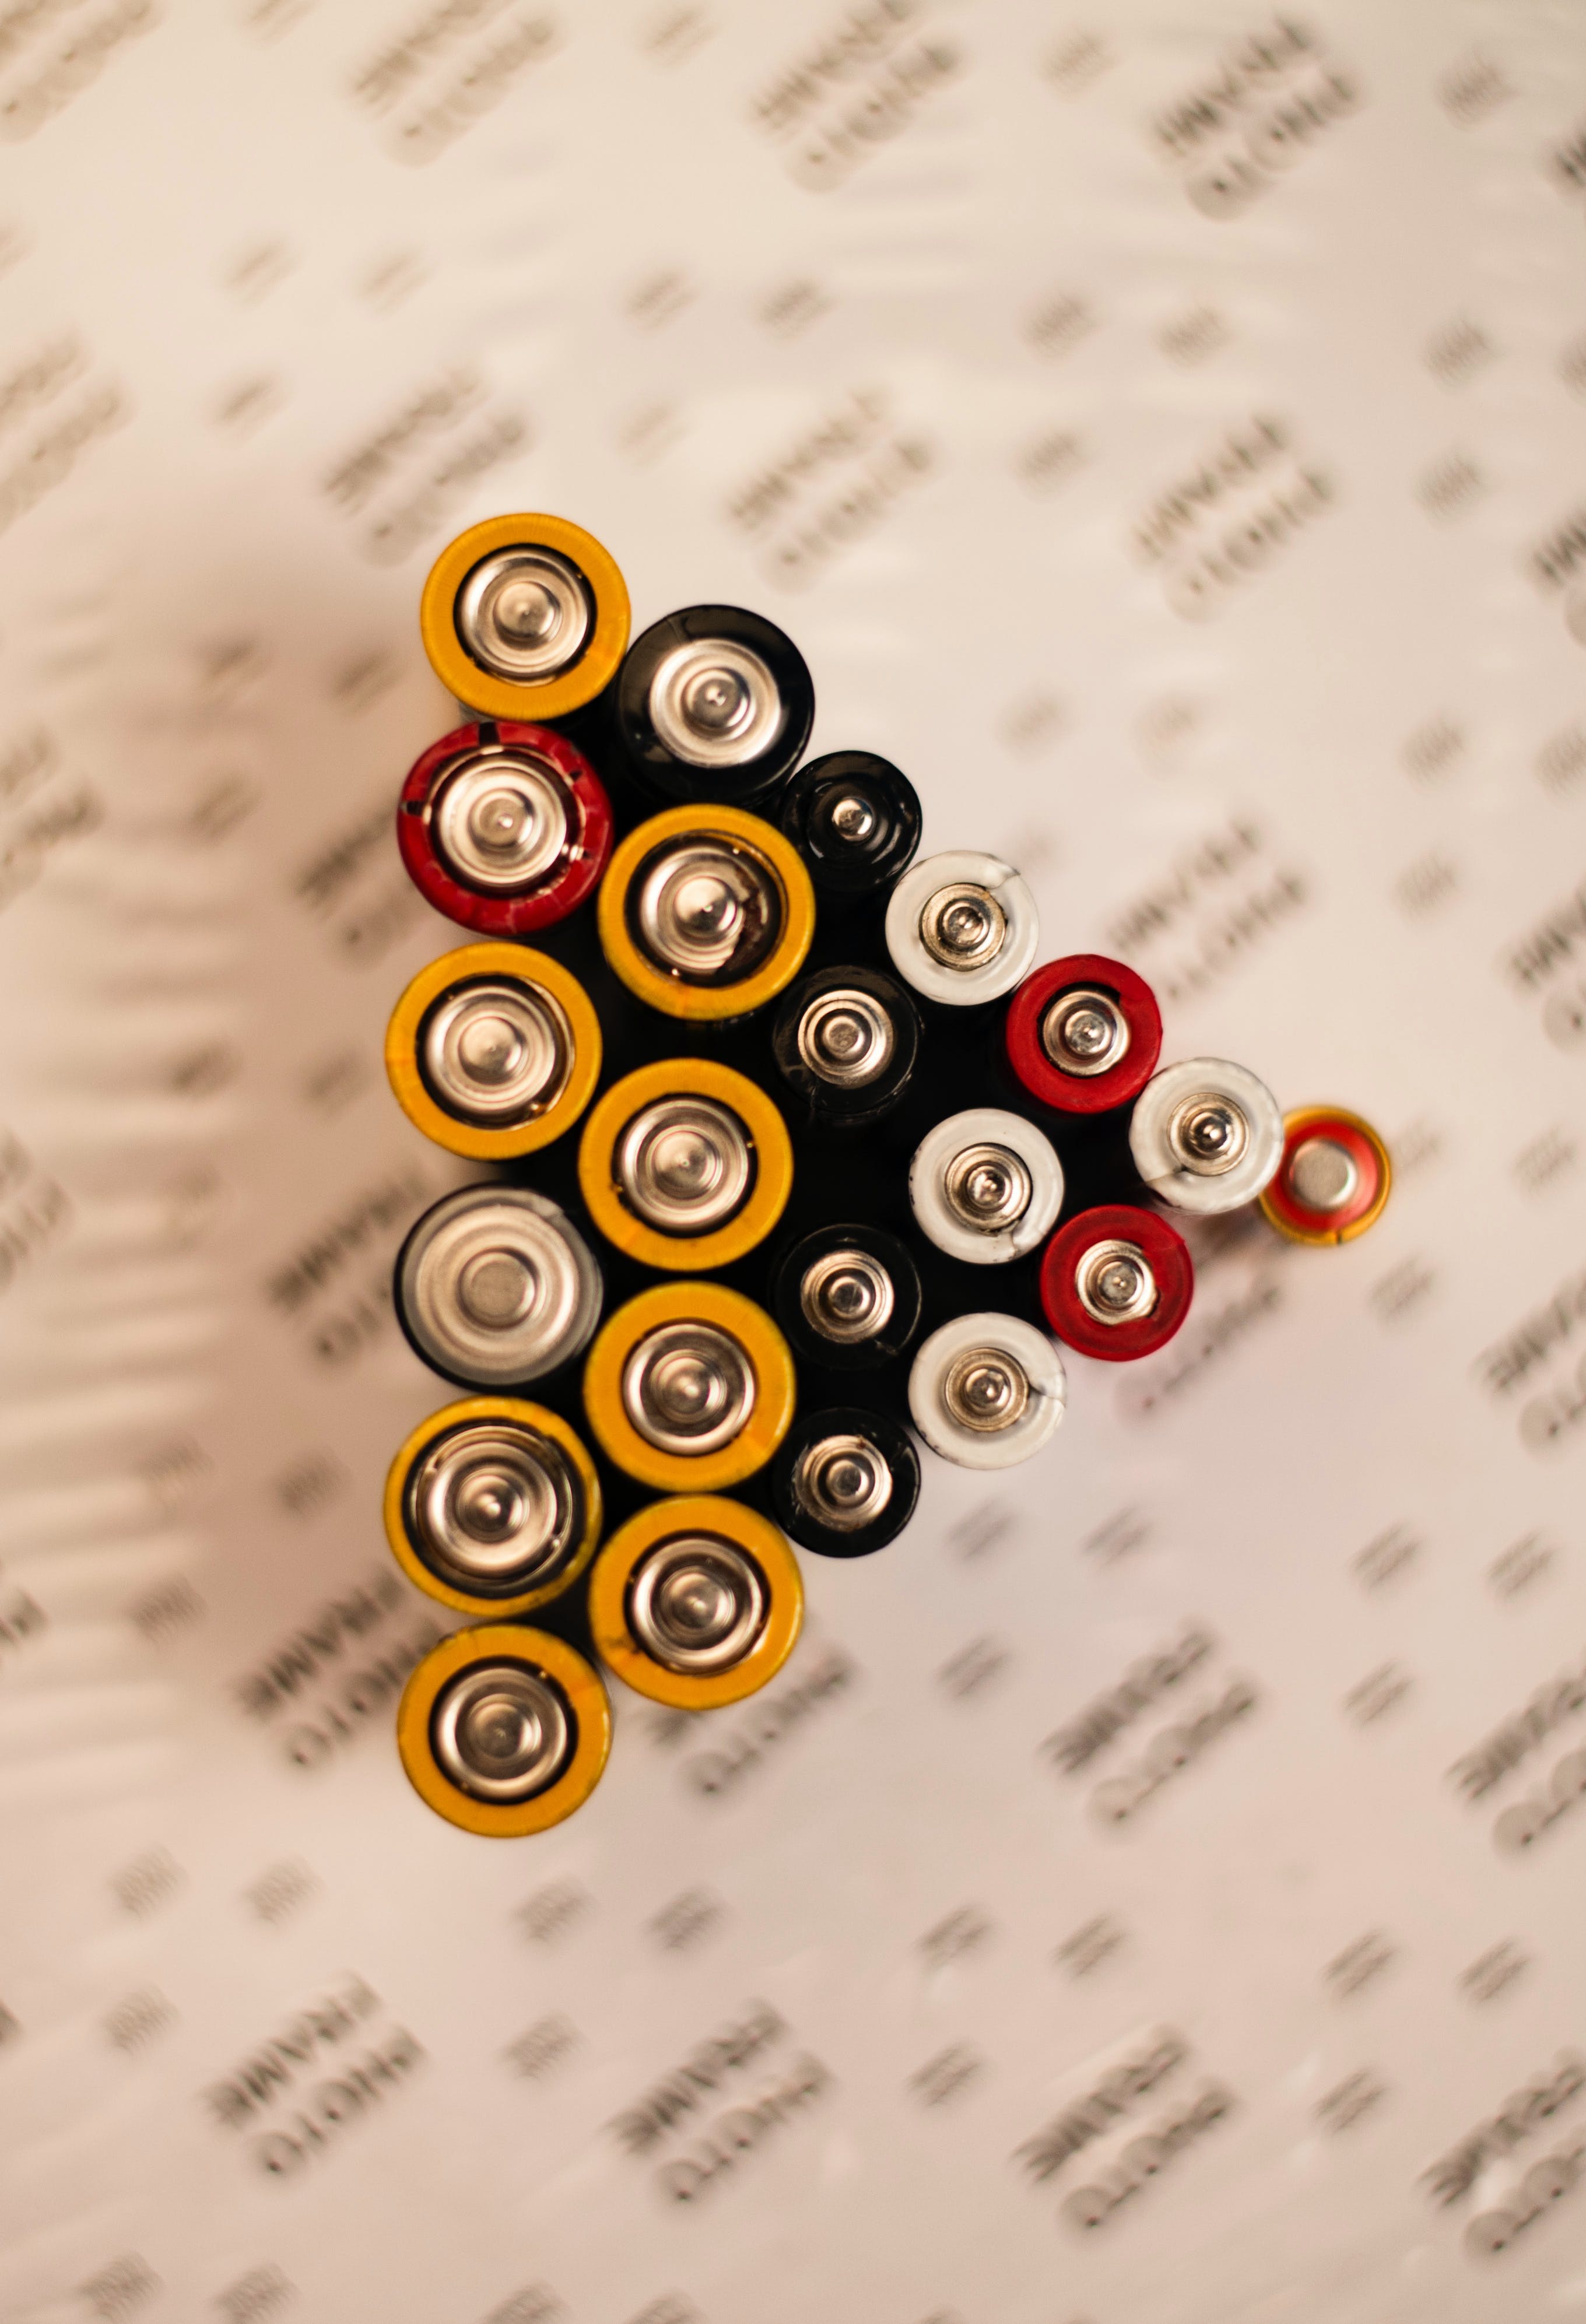 Assorted battery sizes | Source: Pexels